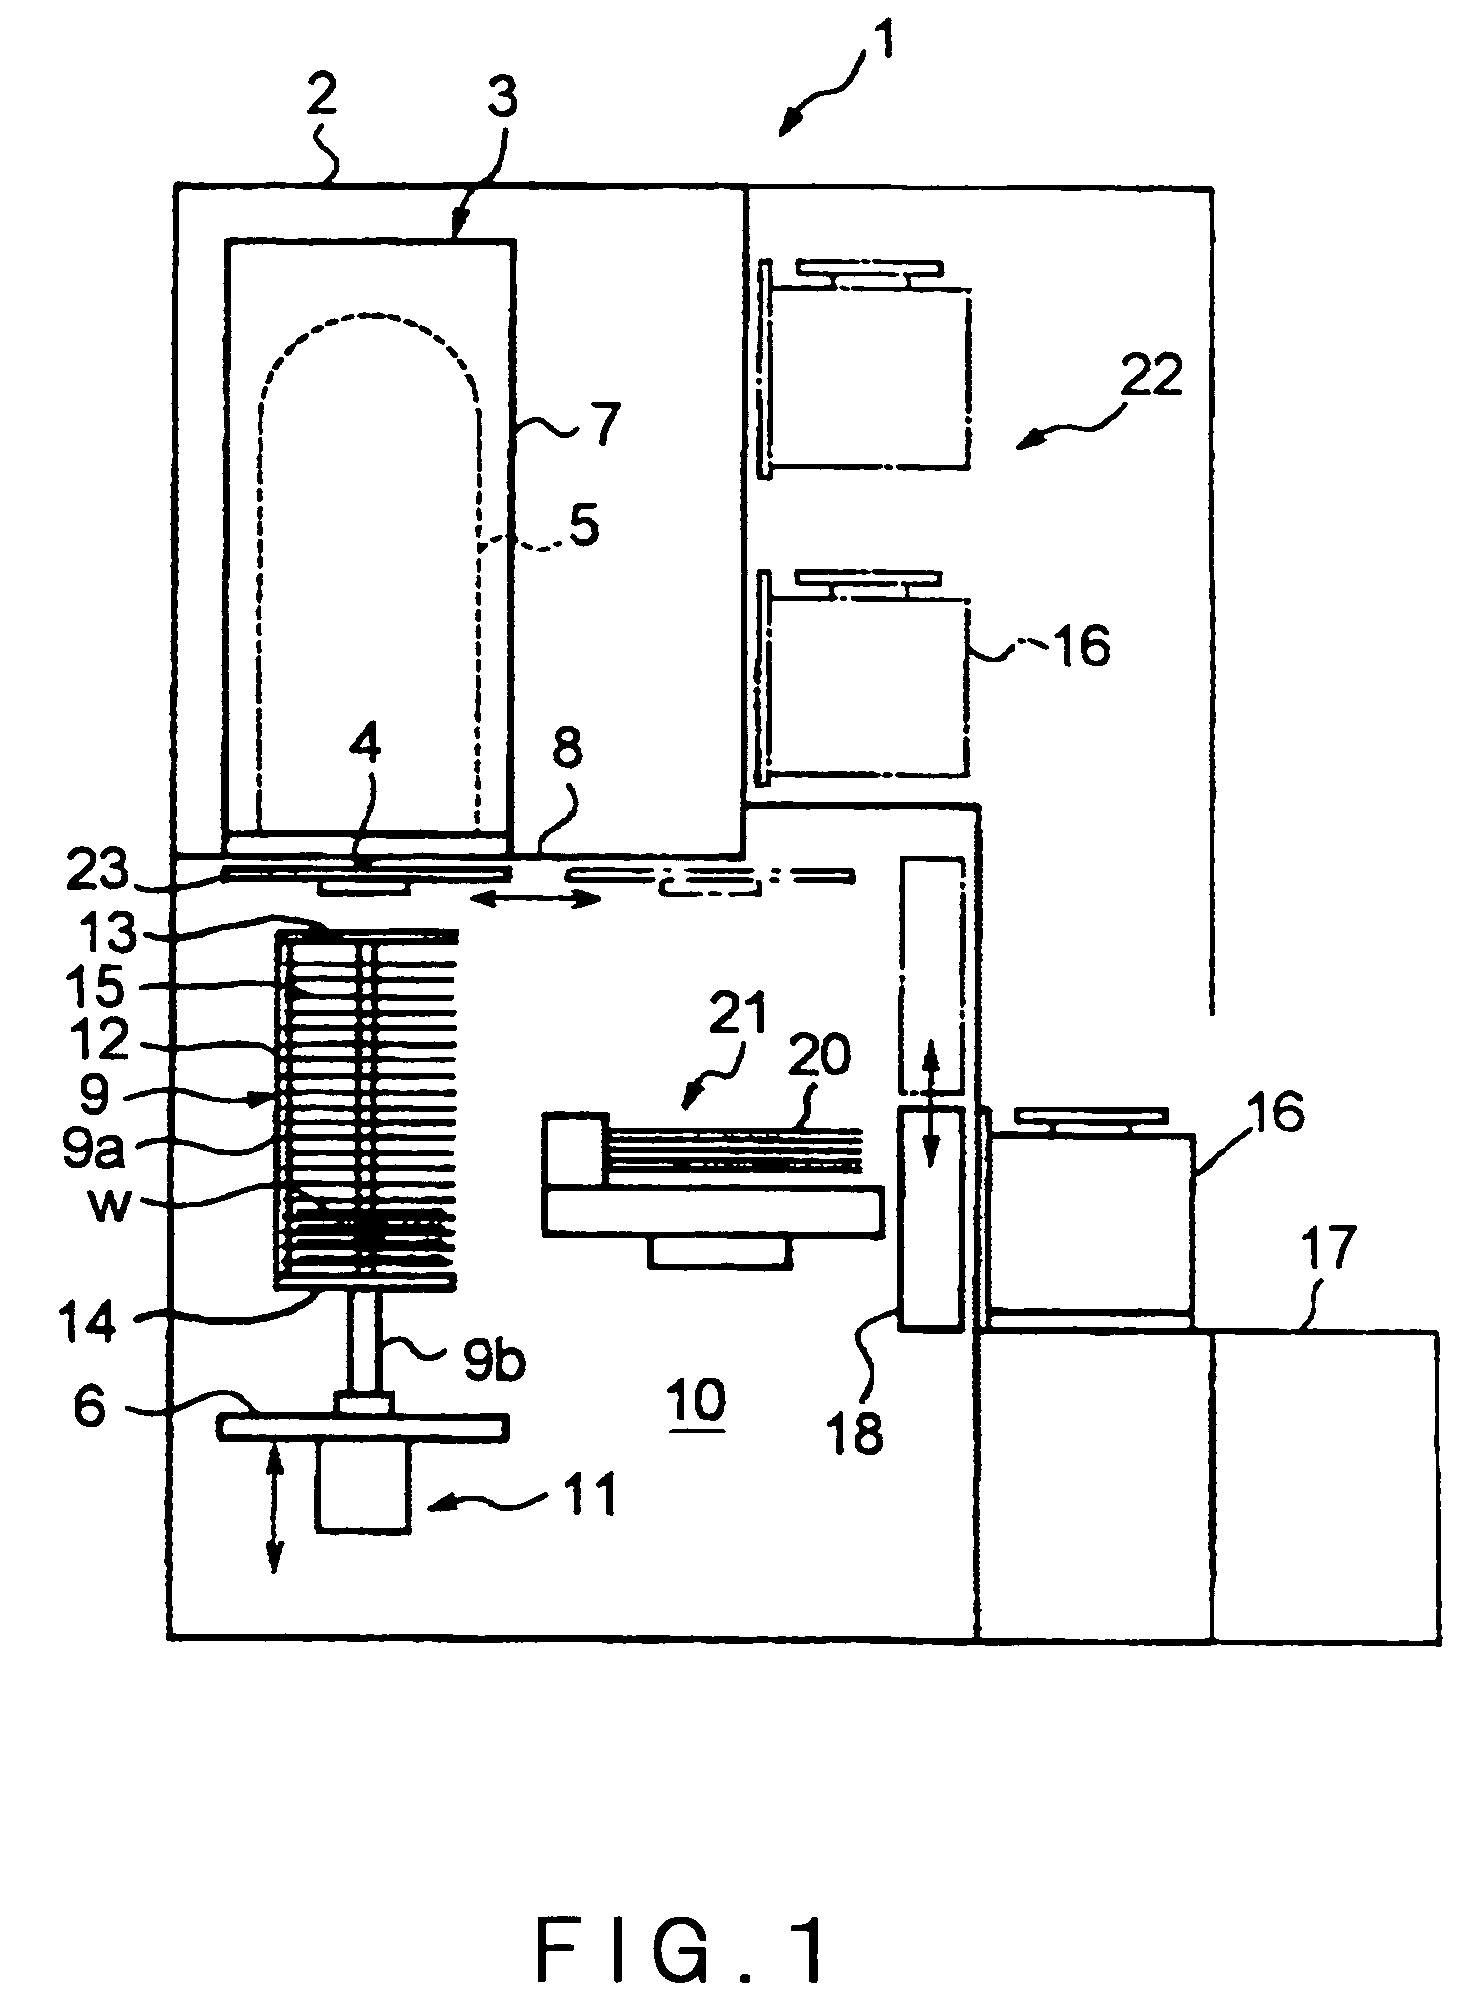 Vertical heat treatment system and method of transferring process objects